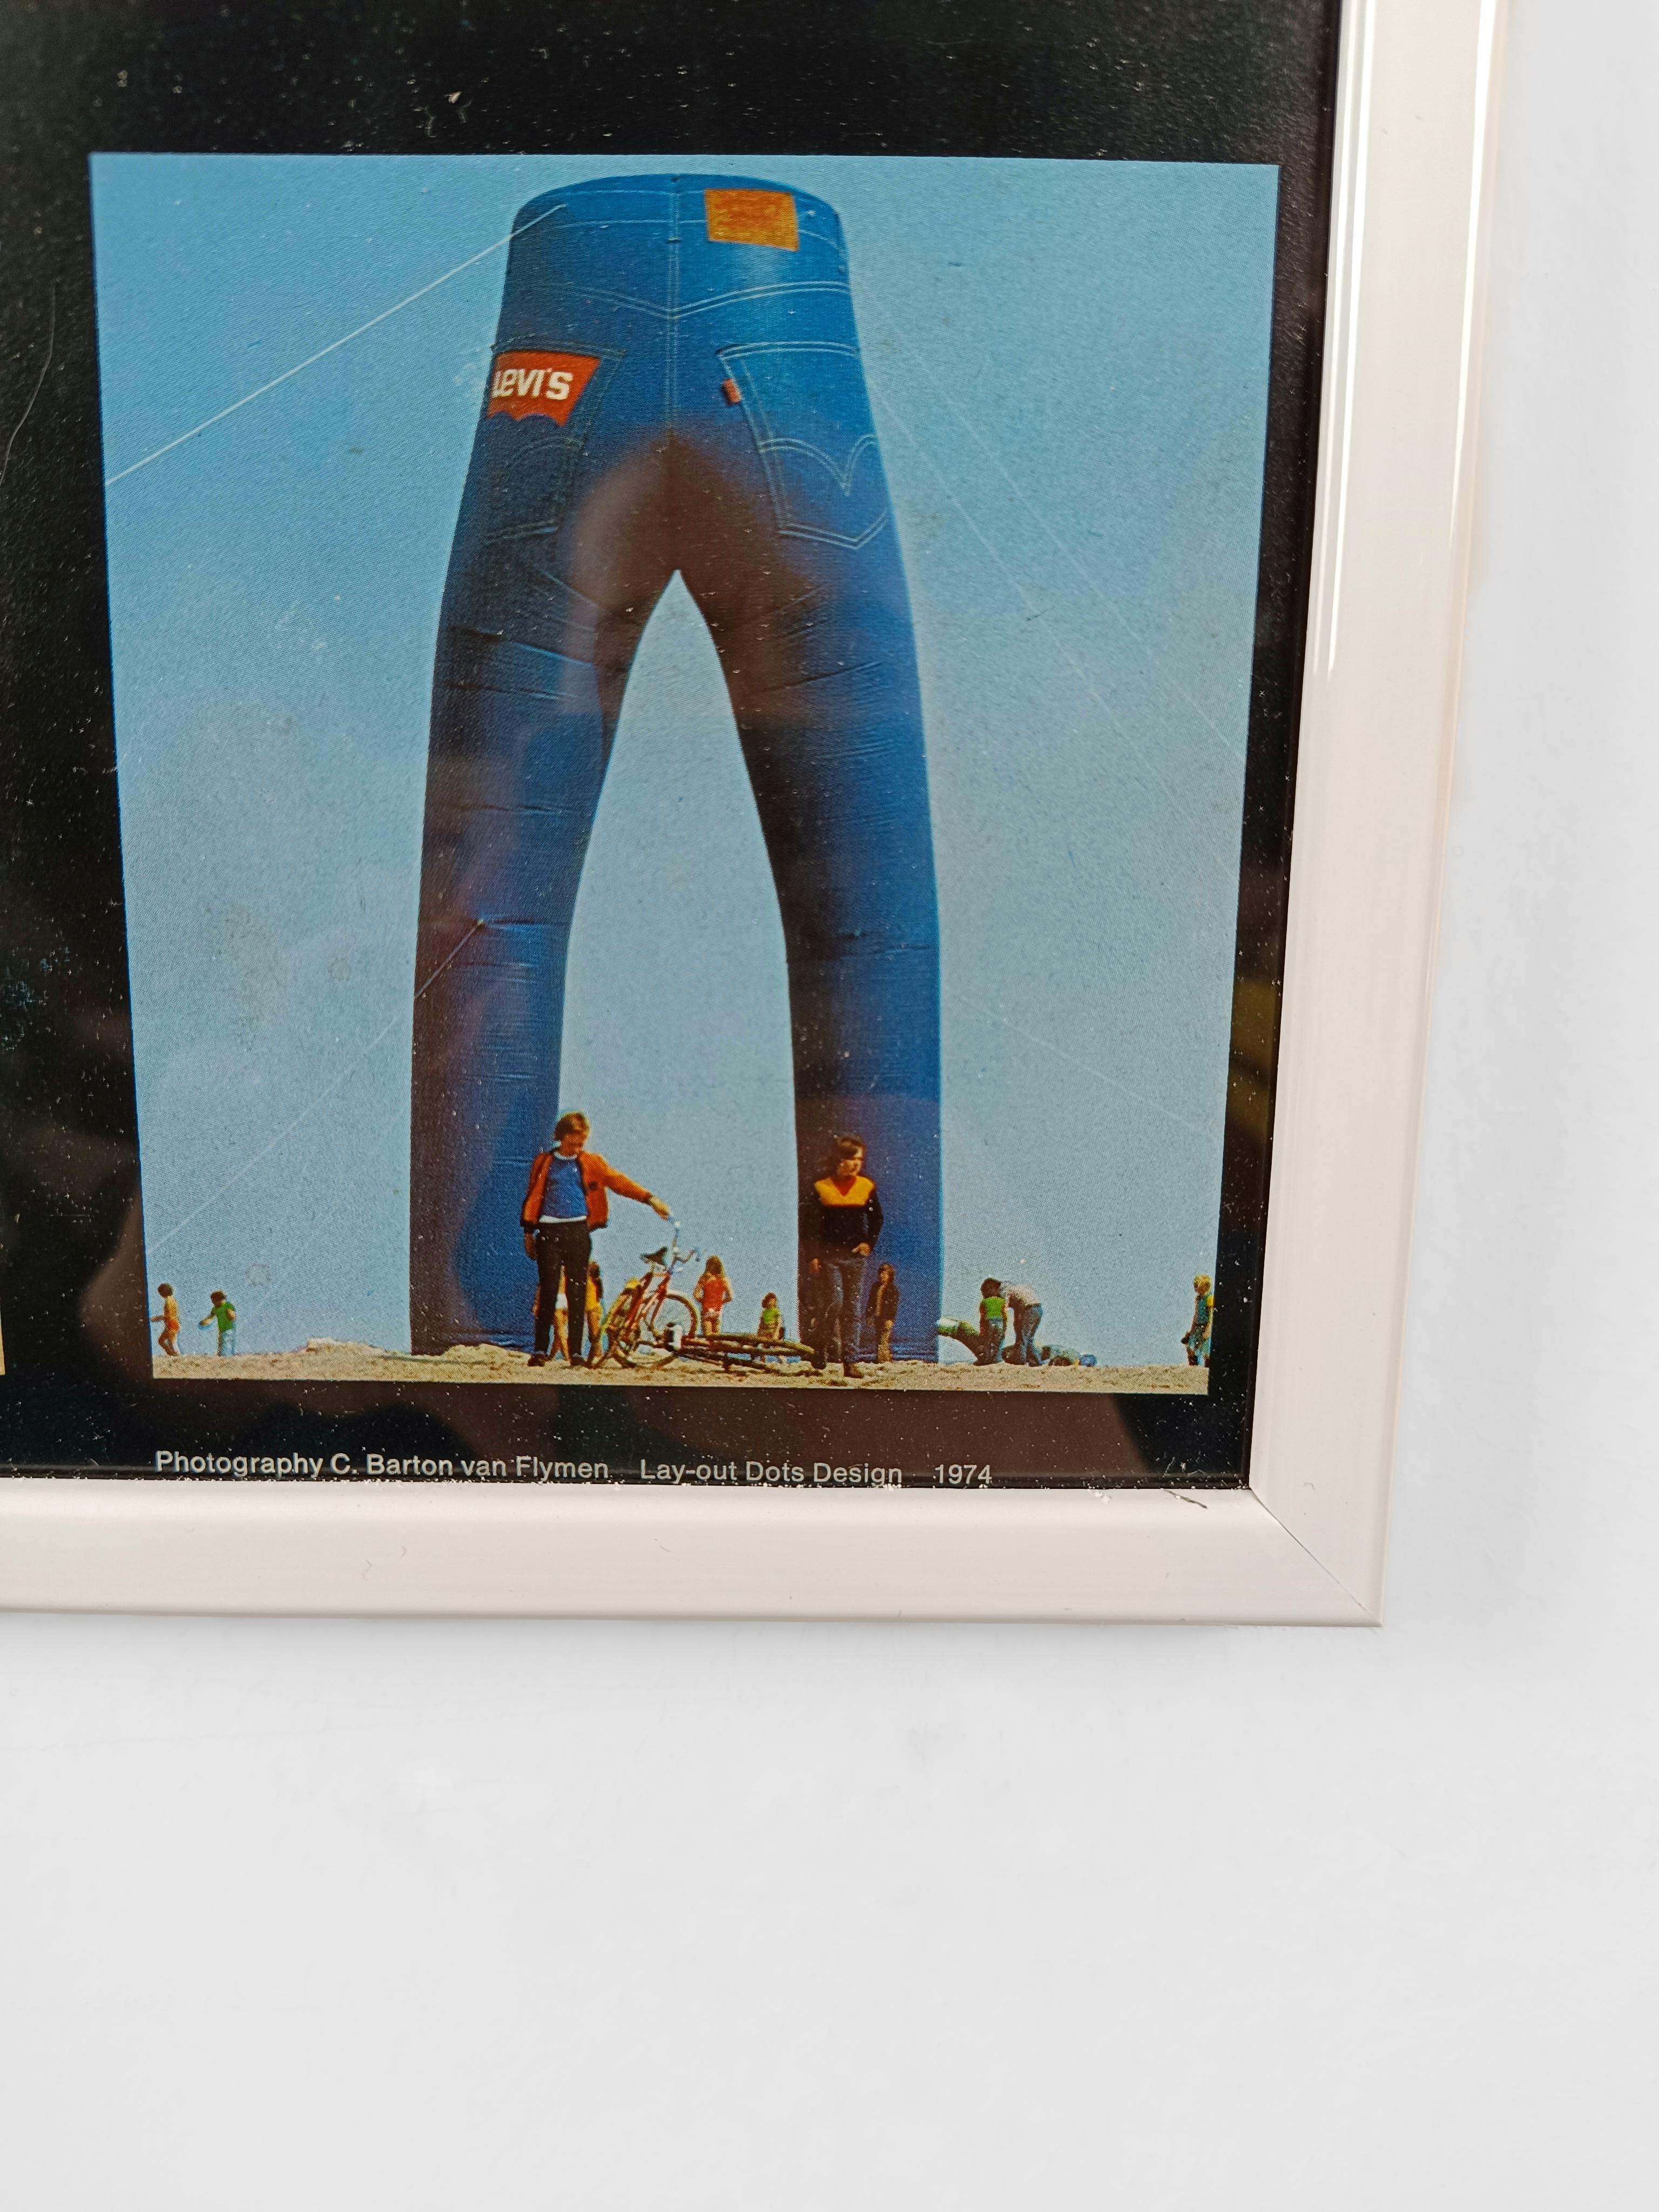 Vintage Levi's Advertising Poster from 1974, Photography by C. Barton van Flymen 1